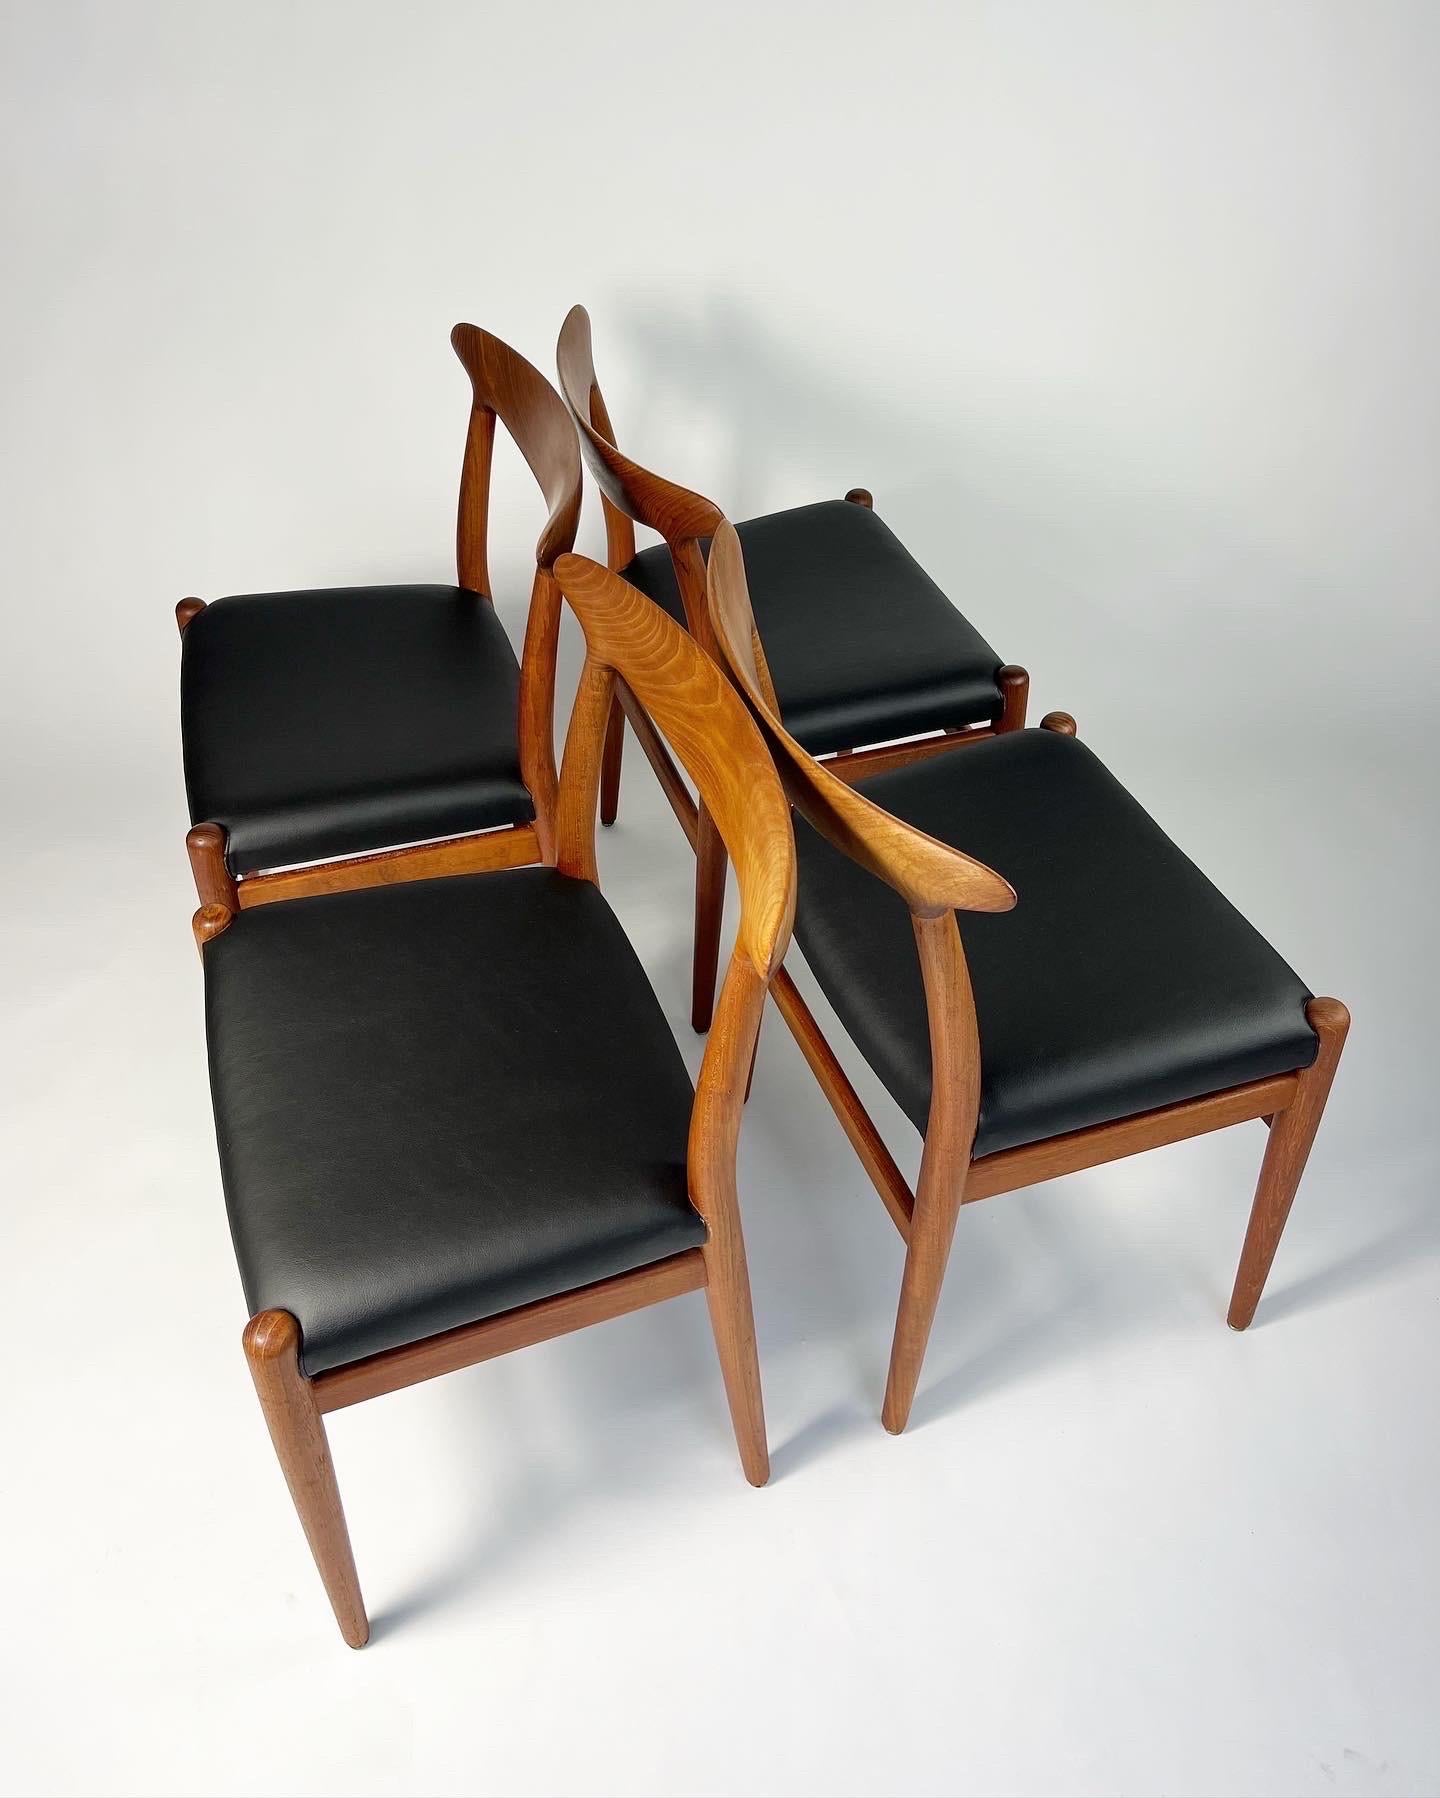 Hand-Crafted Set of Four Hans Wegner Dining Chairs CM Madsen W2 Teak & Leather Cacti Vegan For Sale